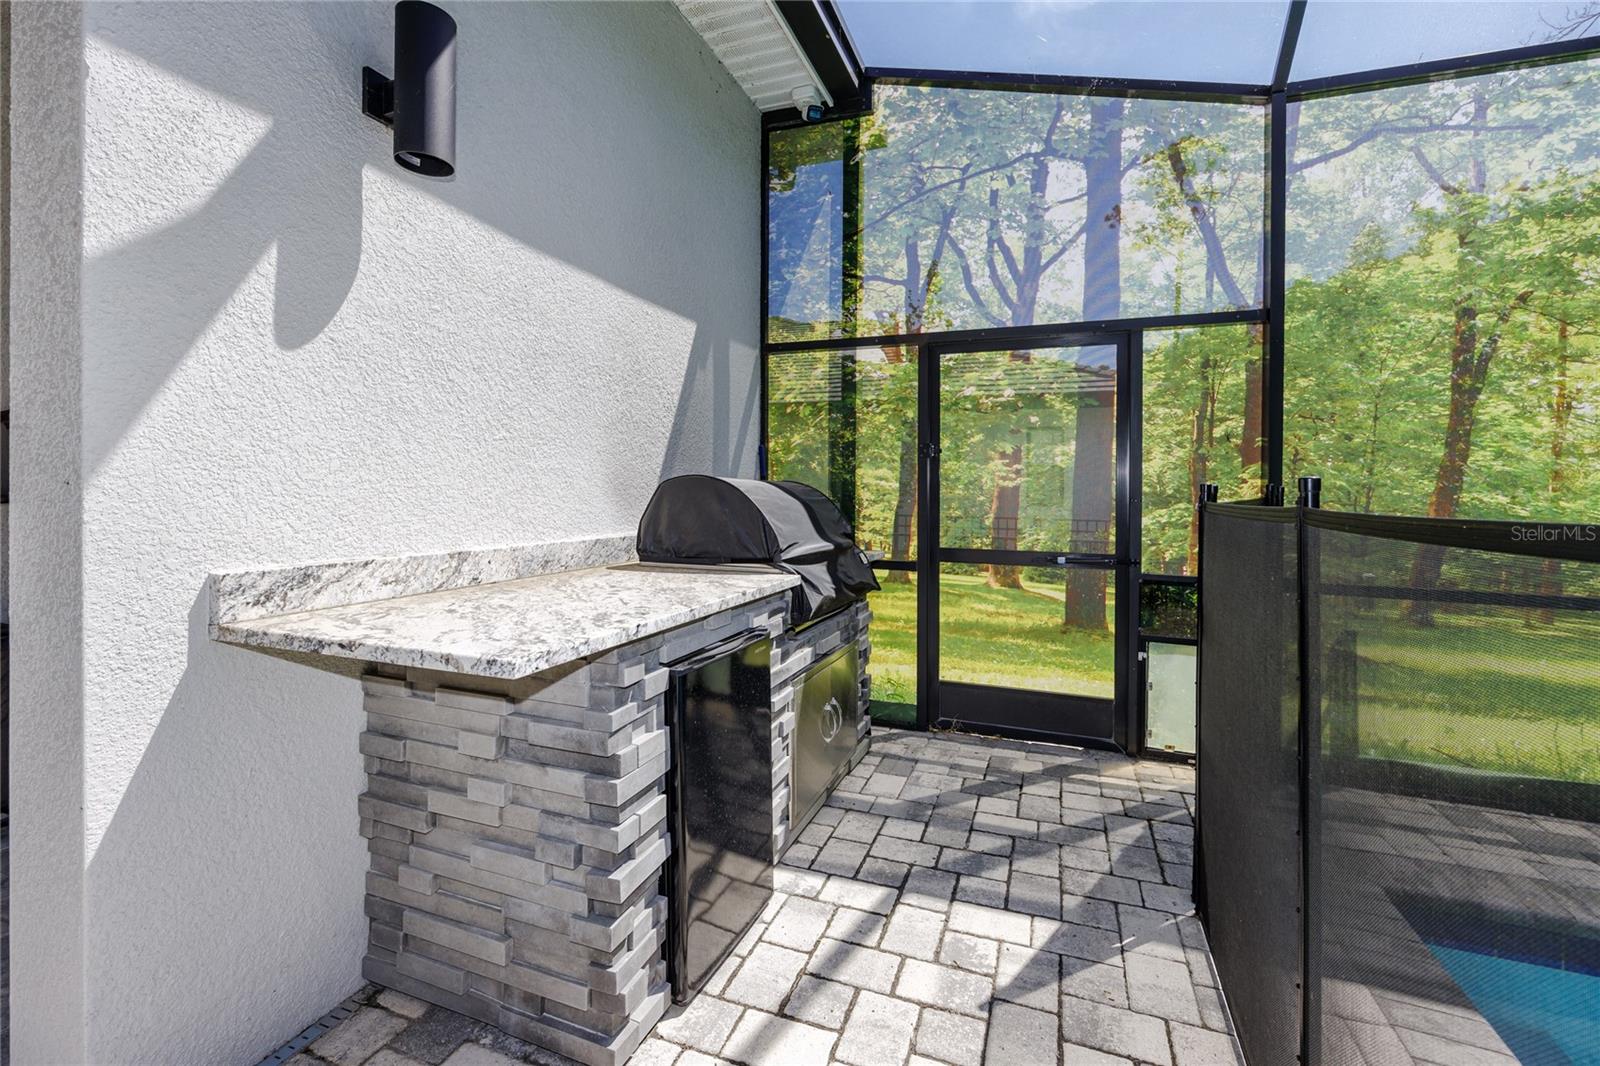 Outdoor kitchen/grill area